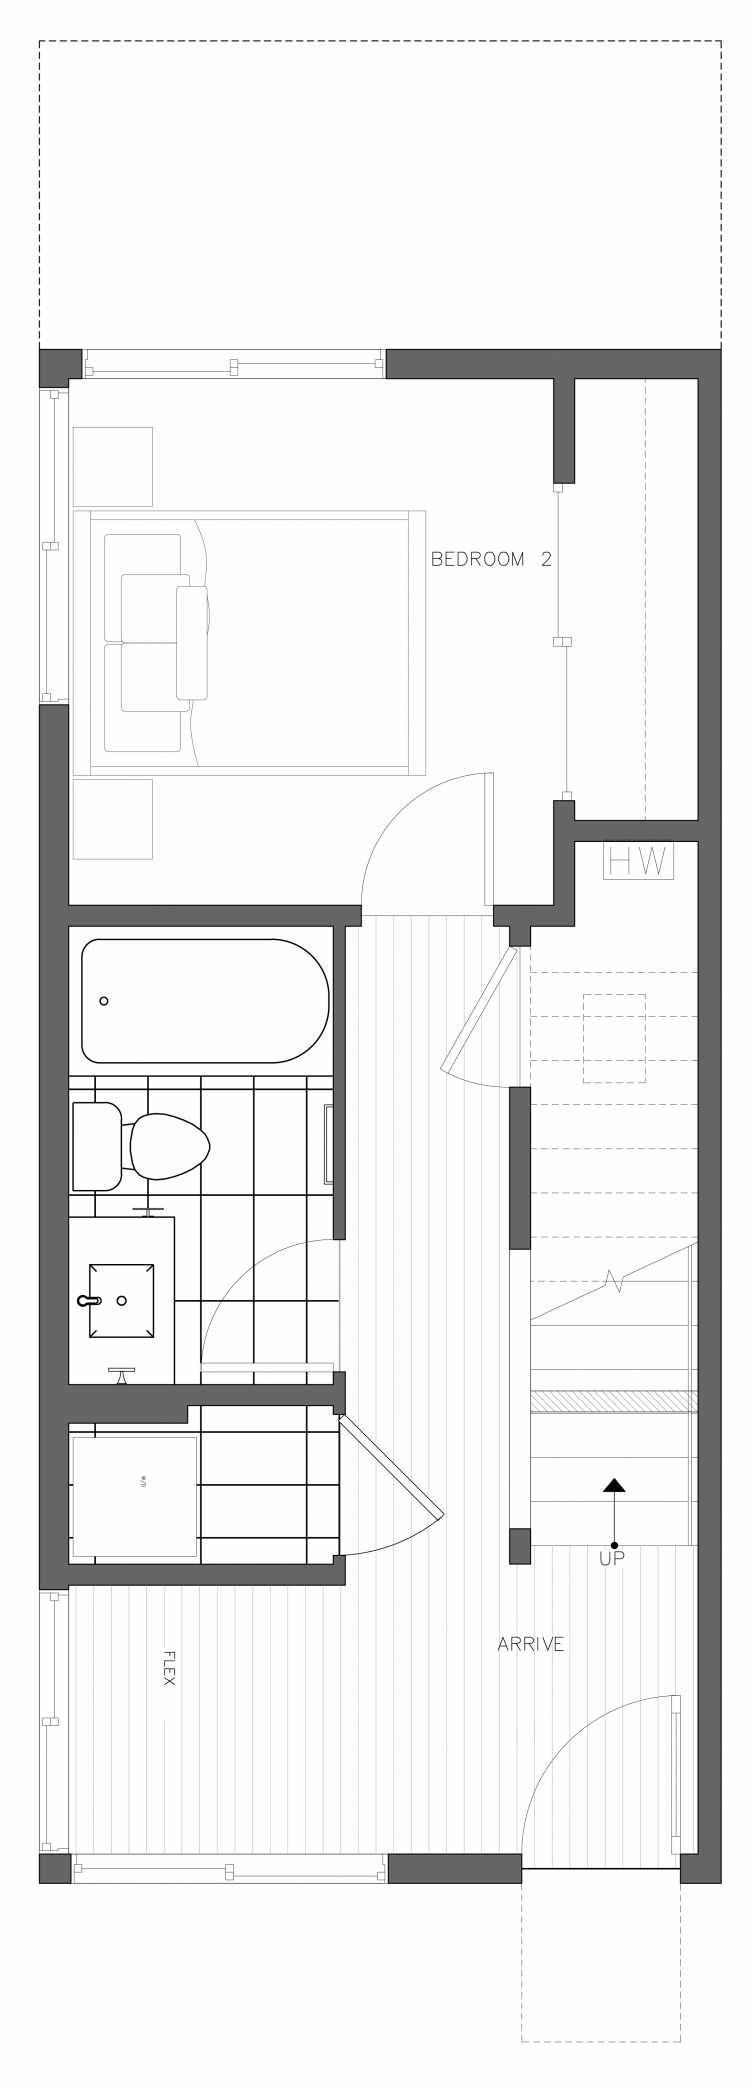 First Floor Plan of 3406A 15th Ave W, One of the Arlo Townhomes in North Queen Anne